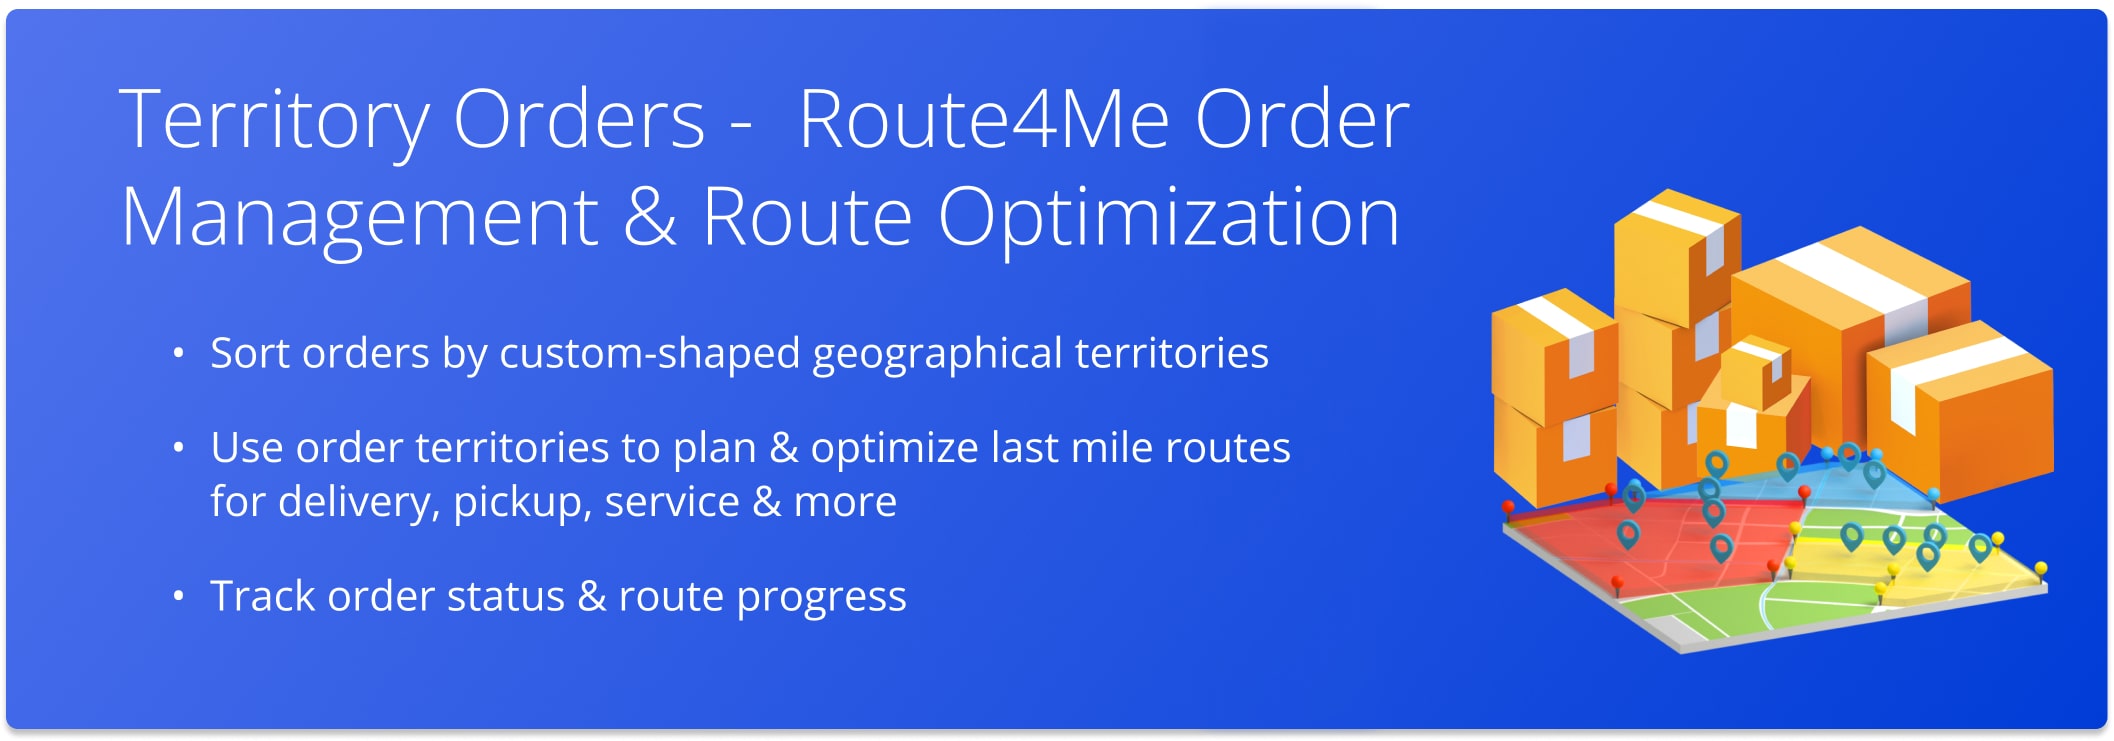 Route4Me's Territory Orders are used for optimizing multi-stop routes within geographical areas.